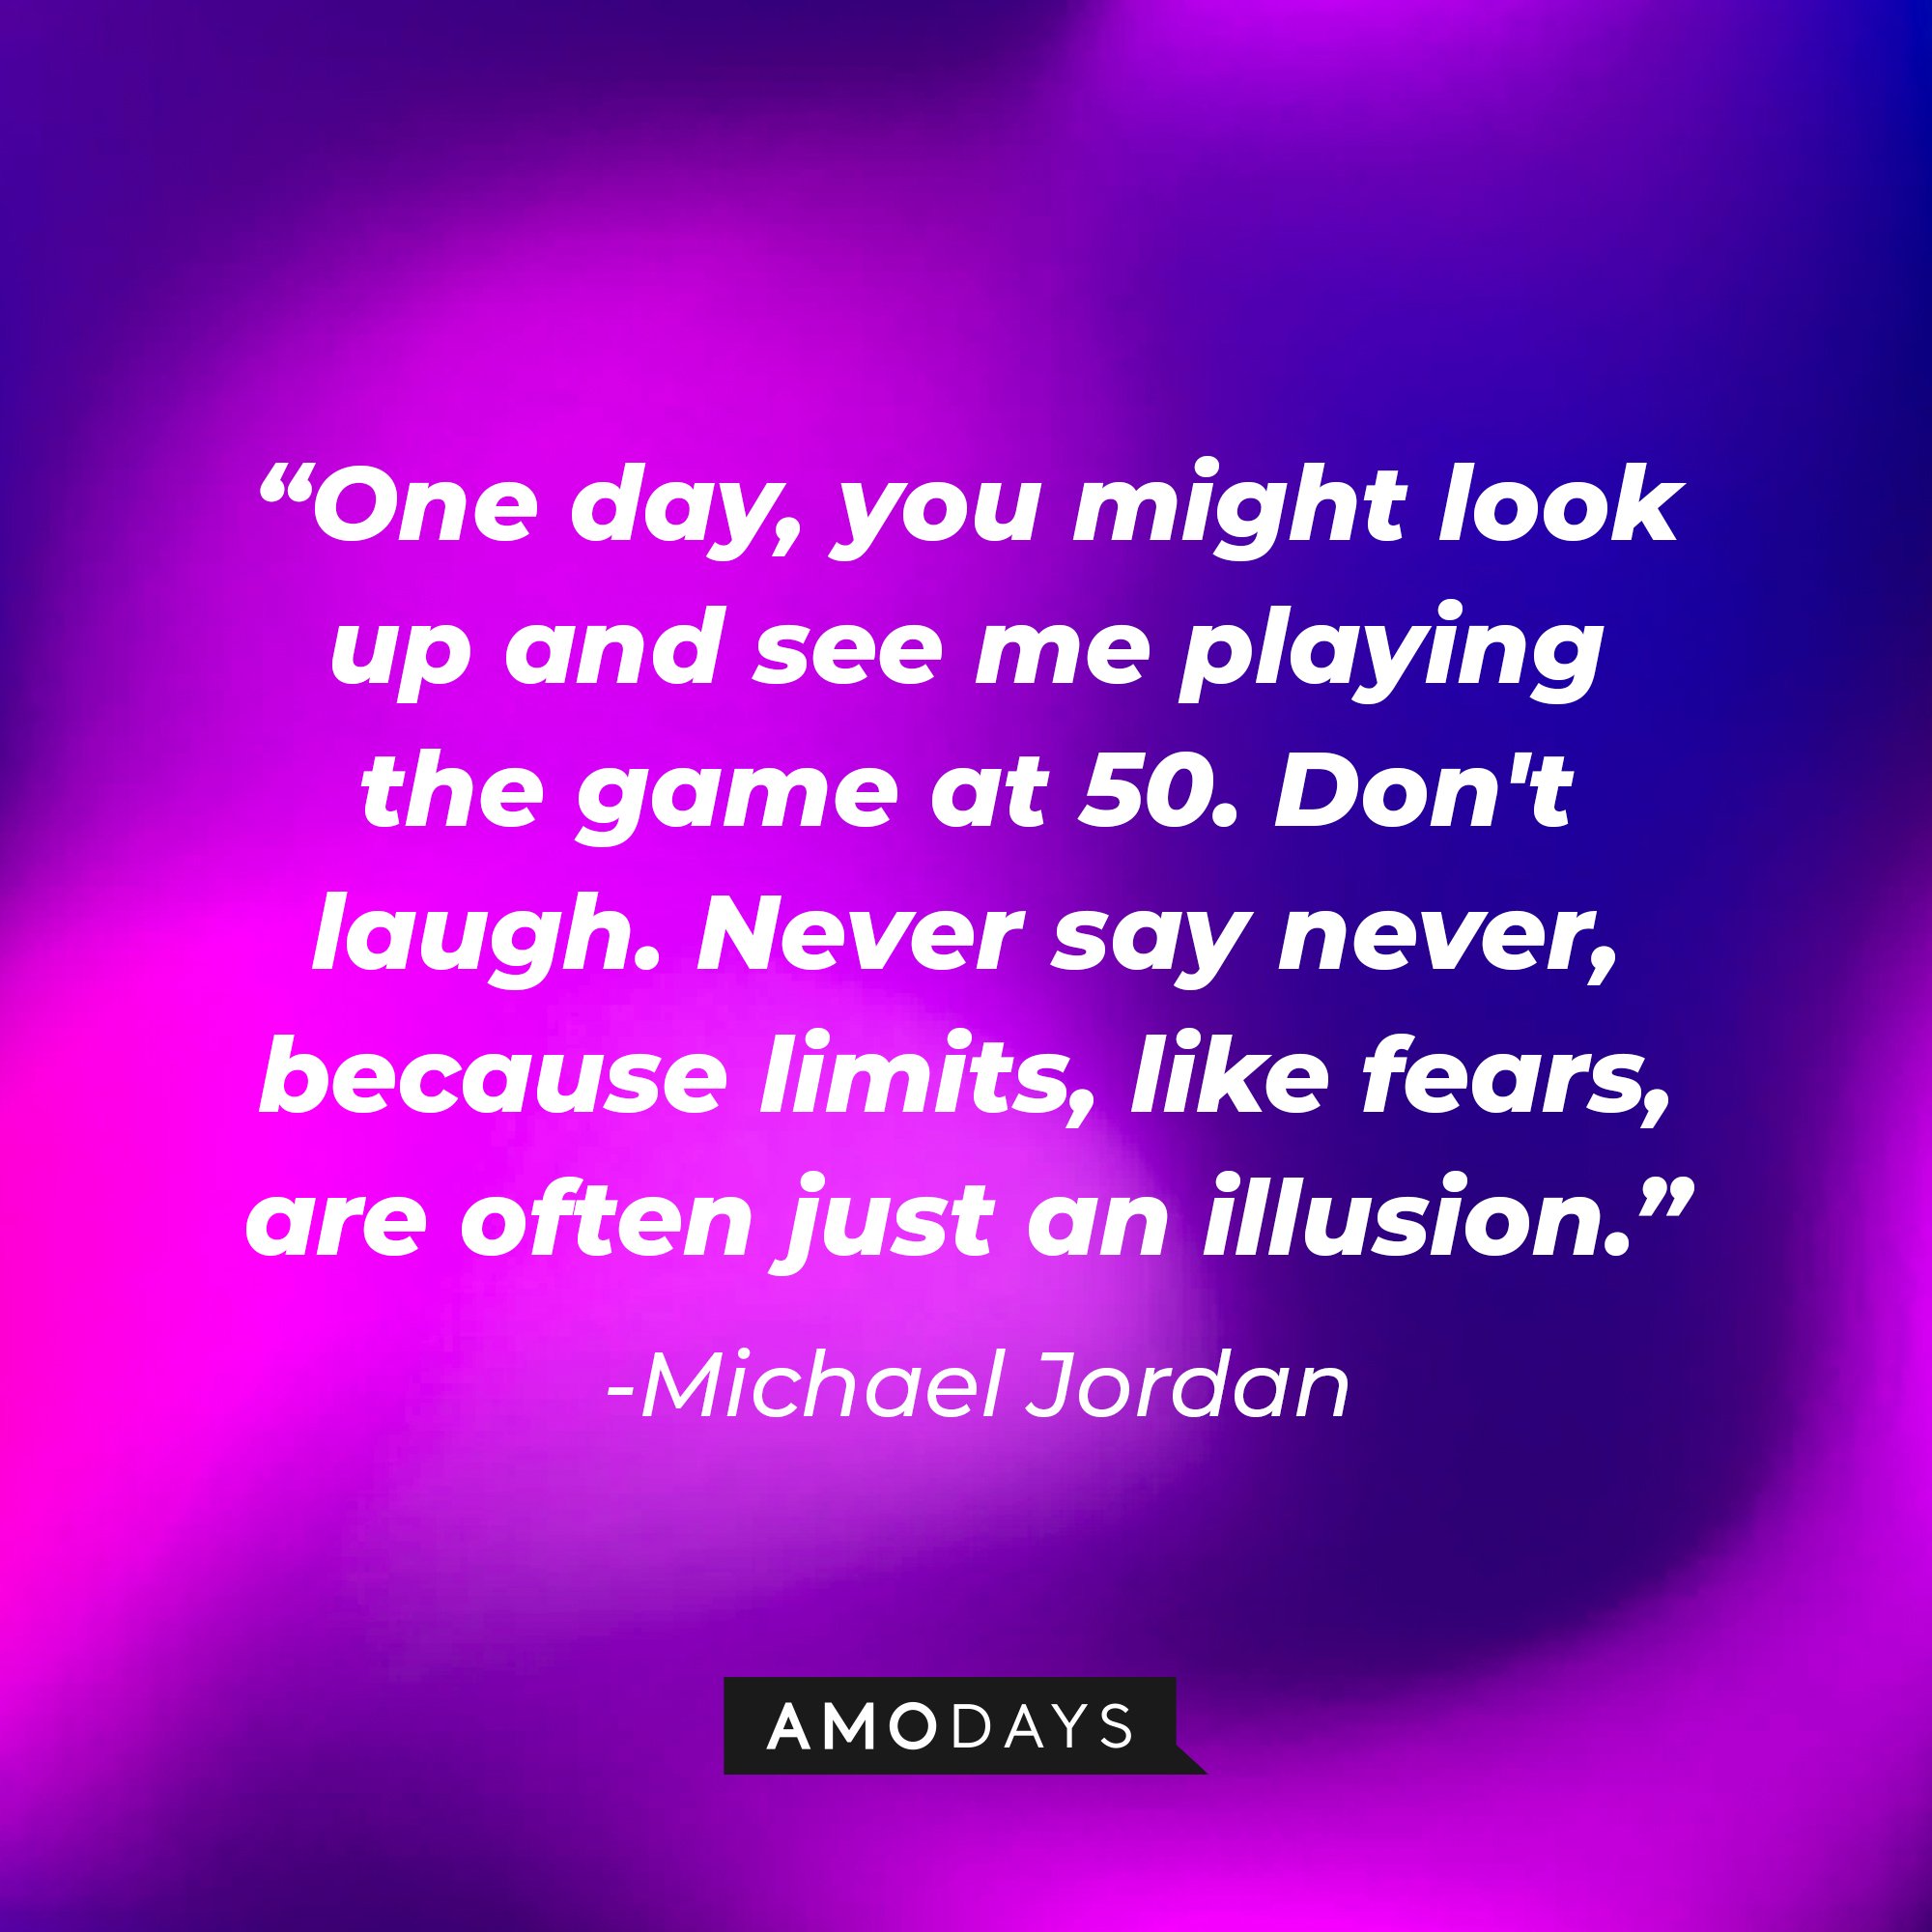 Michael Jordan's quote: "One day, you might look up and see me playing the game at 50. Don't laugh. Never say never, because limits, like fears, are often just an illusion." | Image: AmoDays